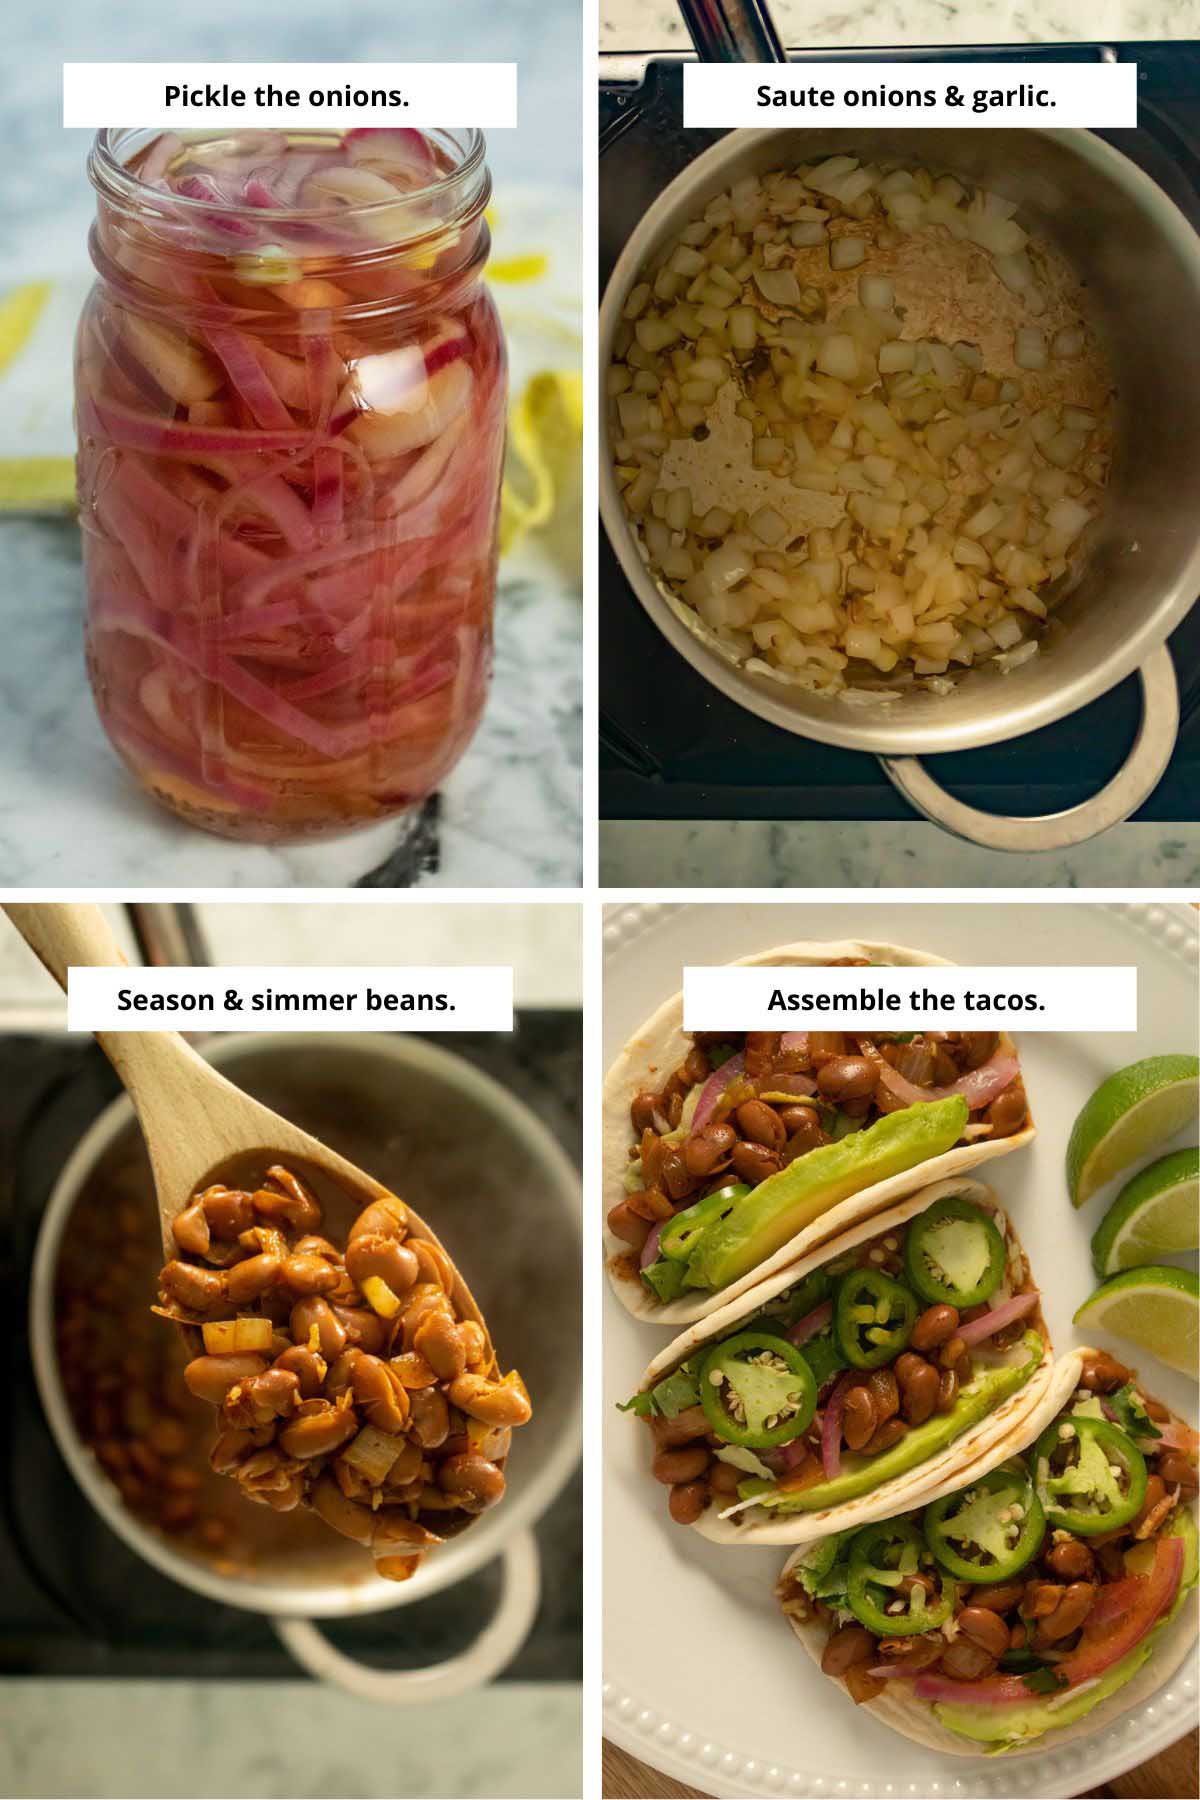 image collage showing the pickled onions, sautéed onions, cooked pinto beans, and tacos after assembly